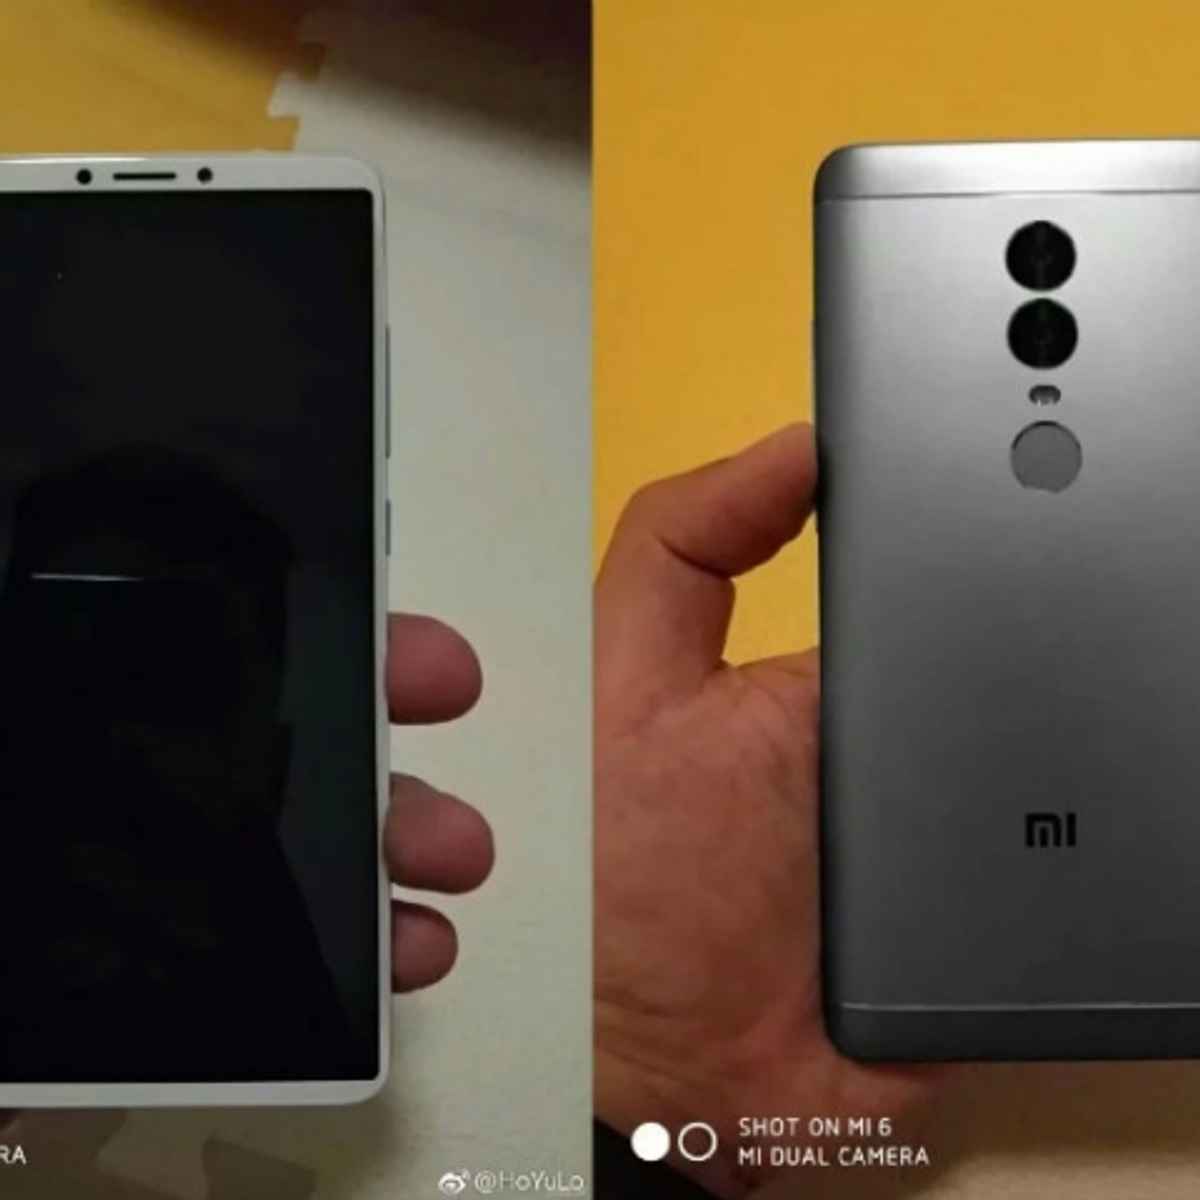 Xiaomi Redmi Note 5 specs and prices leak ahead of launch ... - 